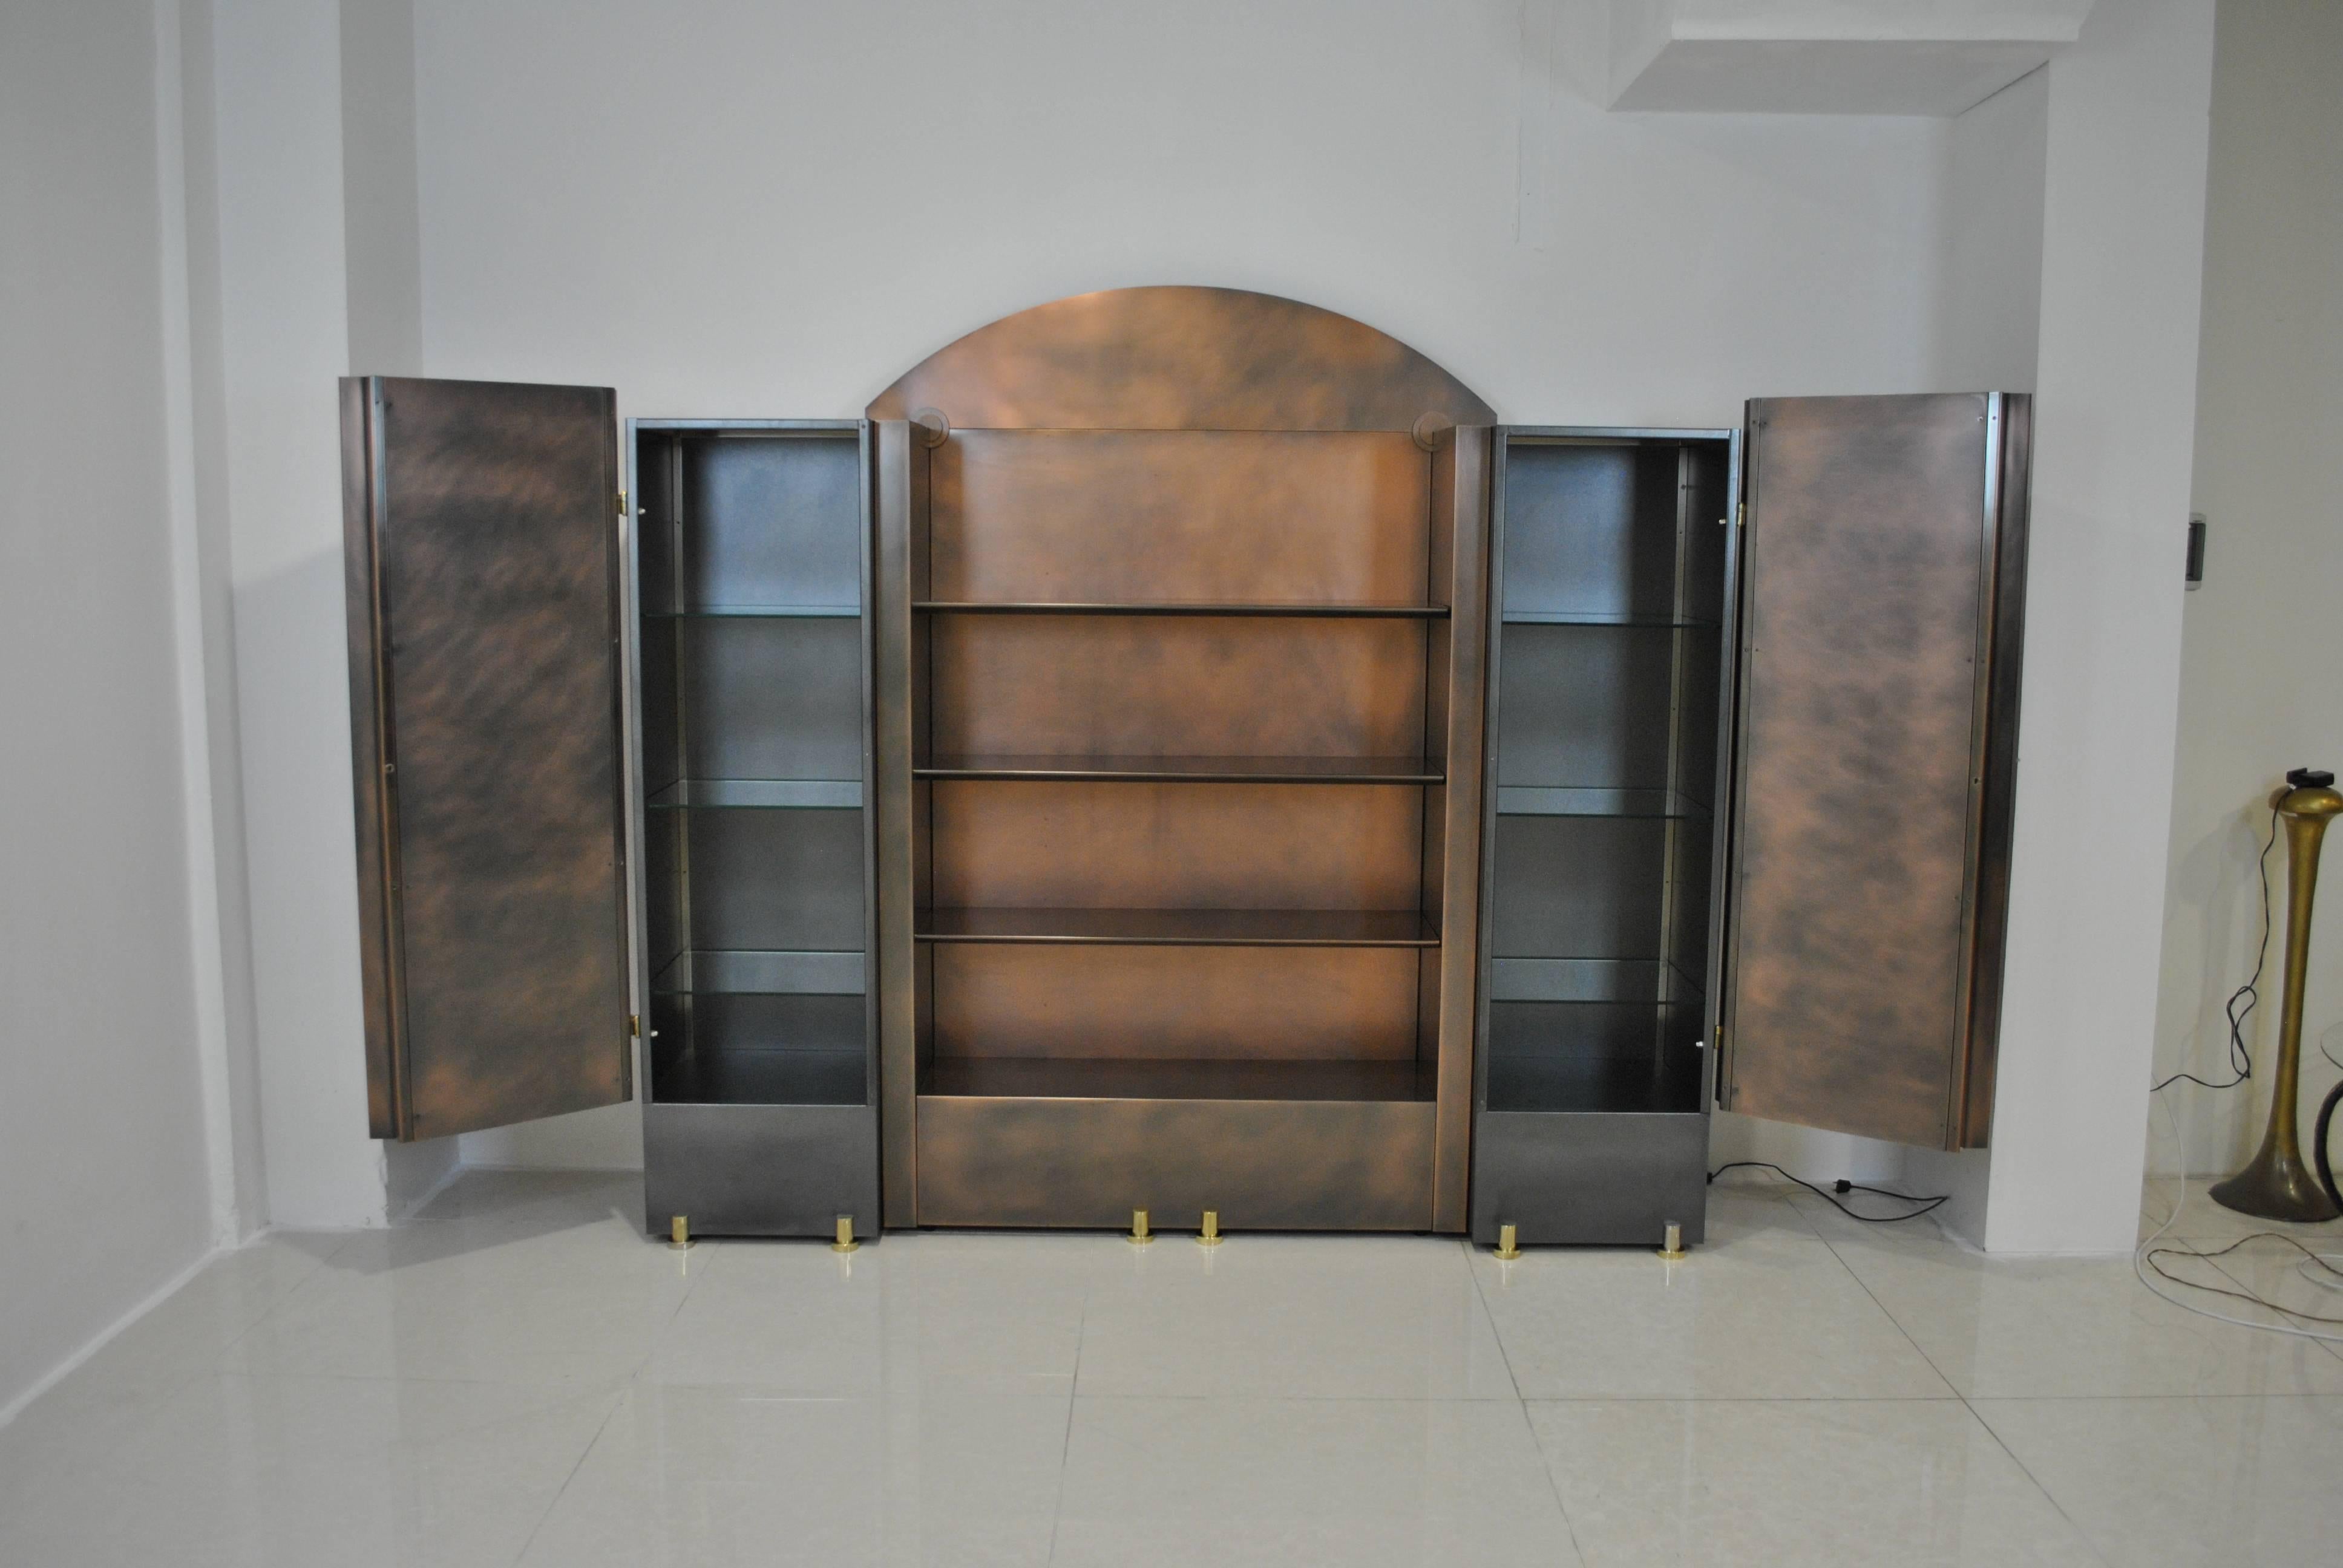 Belgian Neoclassical Steel and Brass Wall Unit by Belgochrom, Belgium, 1980s For Sale